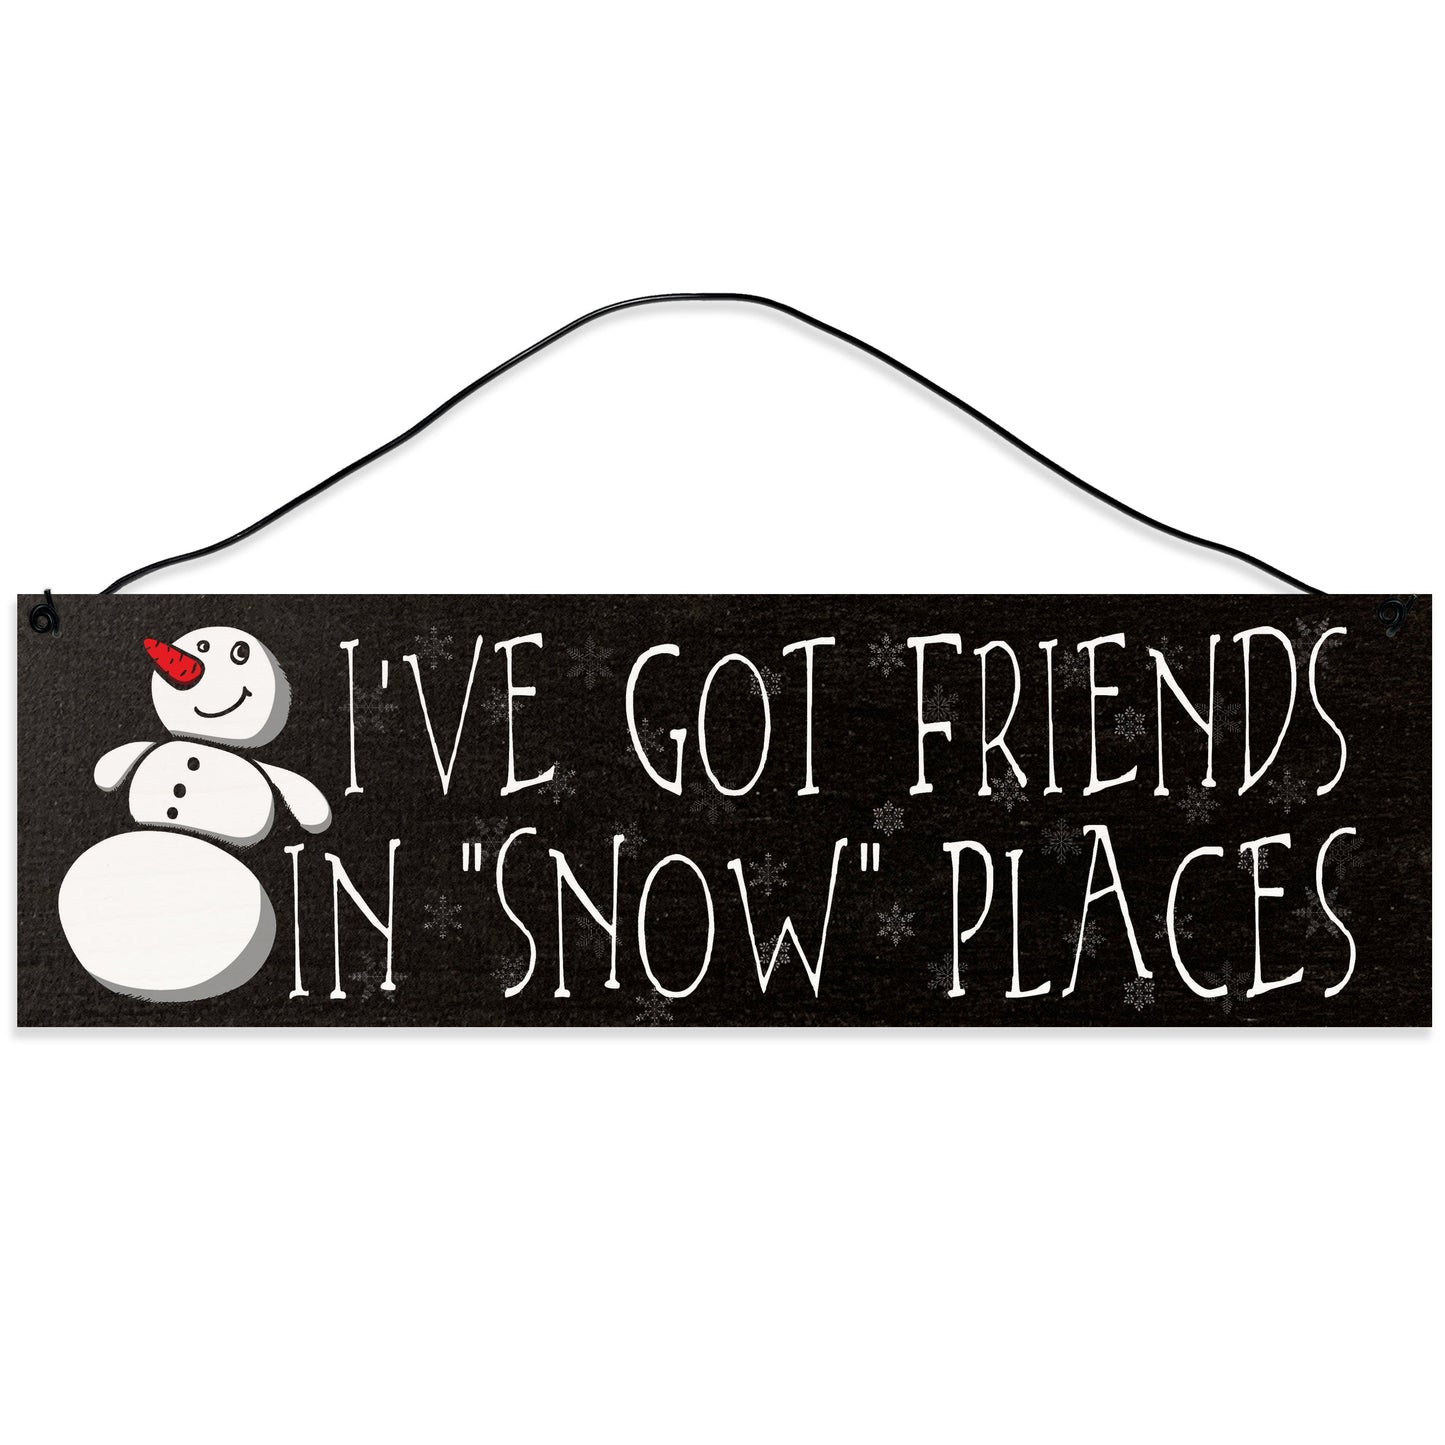 Sawyer's Mill - I've Got Friends in Snow Places. Wood Sign for Home or Office. Measures 3x10 inches.